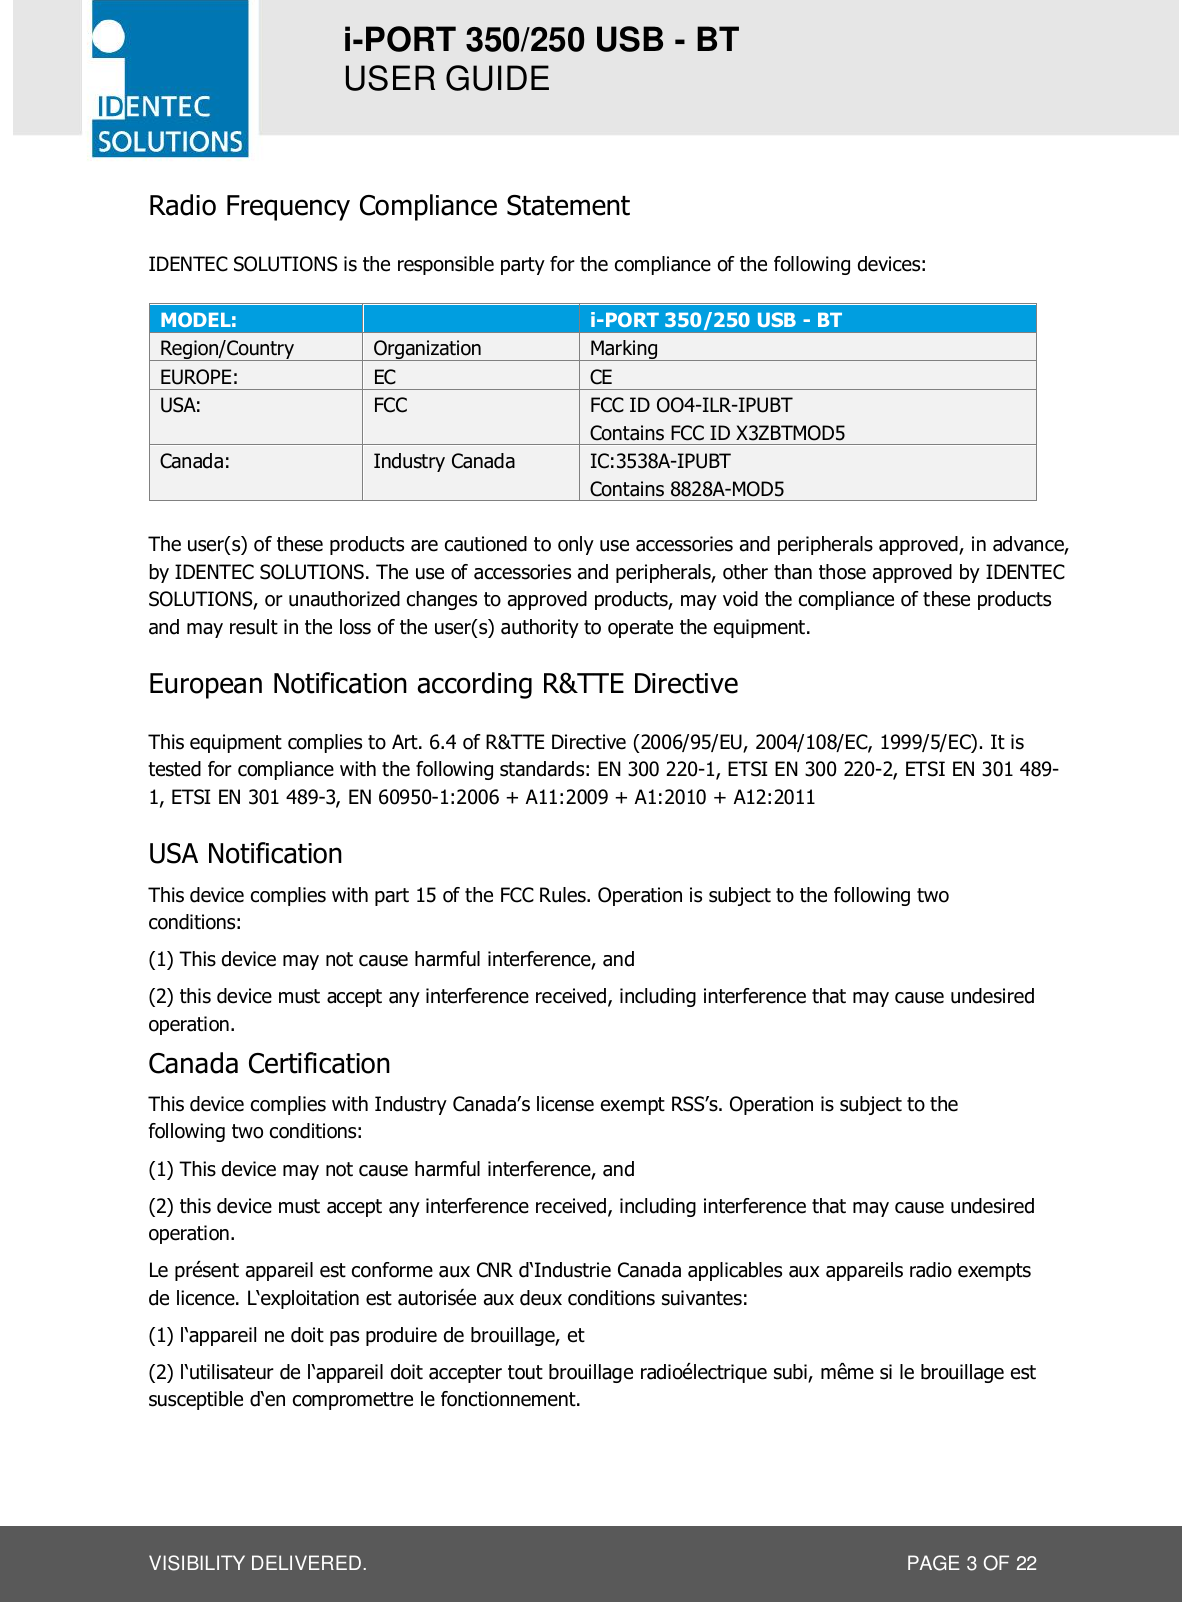 i-PORT 350/250 USB - BT  USER GUIDE  VISIBILITY DELIVERED.  PAGE 3 OF 22 Radio Frequency Compliance Statement  IDENTEC SOLUTIONS is the responsible party for the compliance of the following devices:  MODEL:   i-PORT 350/250 USB - BT Region/Country  Organization  Marking EUROPE:  EC  CE USA:  FCC  FCC ID OO4-ILR-IPUBT Contains FCC ID X3ZBTMOD5 Canada:  Industry Canada  IC:3538A-IPUBT Contains 8828A-MOD5  The user(s) of these products are cautioned to only use accessories and peripherals approved, in advance, by IDENTEC SOLUTIONS. The use of accessories and peripherals, other than those approved by IDENTEC SOLUTIONS, or unauthorized changes to approved products, may void the compliance of these products and may result in the loss of the user(s) authority to operate the equipment.  European Notification according R&amp;TTE Directive  This equipment complies to Art. 6.4 of R&amp;TTE Directive (2006/95/EU, 2004/108/EC, 1999/5/EC). It is tested for compliance with the following standards: EN 300 220-1, ETSI EN 300 220-2, ETSI EN 301 489-1, ETSI EN 301 489-3, EN 60950-1:2006 + A11:2009 + A1:2010 + A12:2011  USA Notification This device complies with part 15 of the FCC Rules. Operation is subject to the following two conditions:  (1) This device may not cause harmful interference, and  (2) this device must accept any interference received, including interference that may cause undesired operation. Canada Certification This device complies with Industry Canada’s license exempt RSS’s. Operation is subject to the following two conditions:  (1) This device may not cause harmful interference, and  (2) this device must accept any interference received, including interference that may cause undesired operation. Le présent appareil est conforme aux CNR d‘Industrie Canada applicables aux appareils radio exempts de licence. L‘exploitation est autorisée aux deux conditions suivantes: (1) l‘appareil ne doit pas produire de brouillage, et (2) l‘utilisateur de l‘appareil doit accepter tout brouillage radioélectrique subi, même si le brouillage est susceptible d‘en compromettre le fonctionnement.    